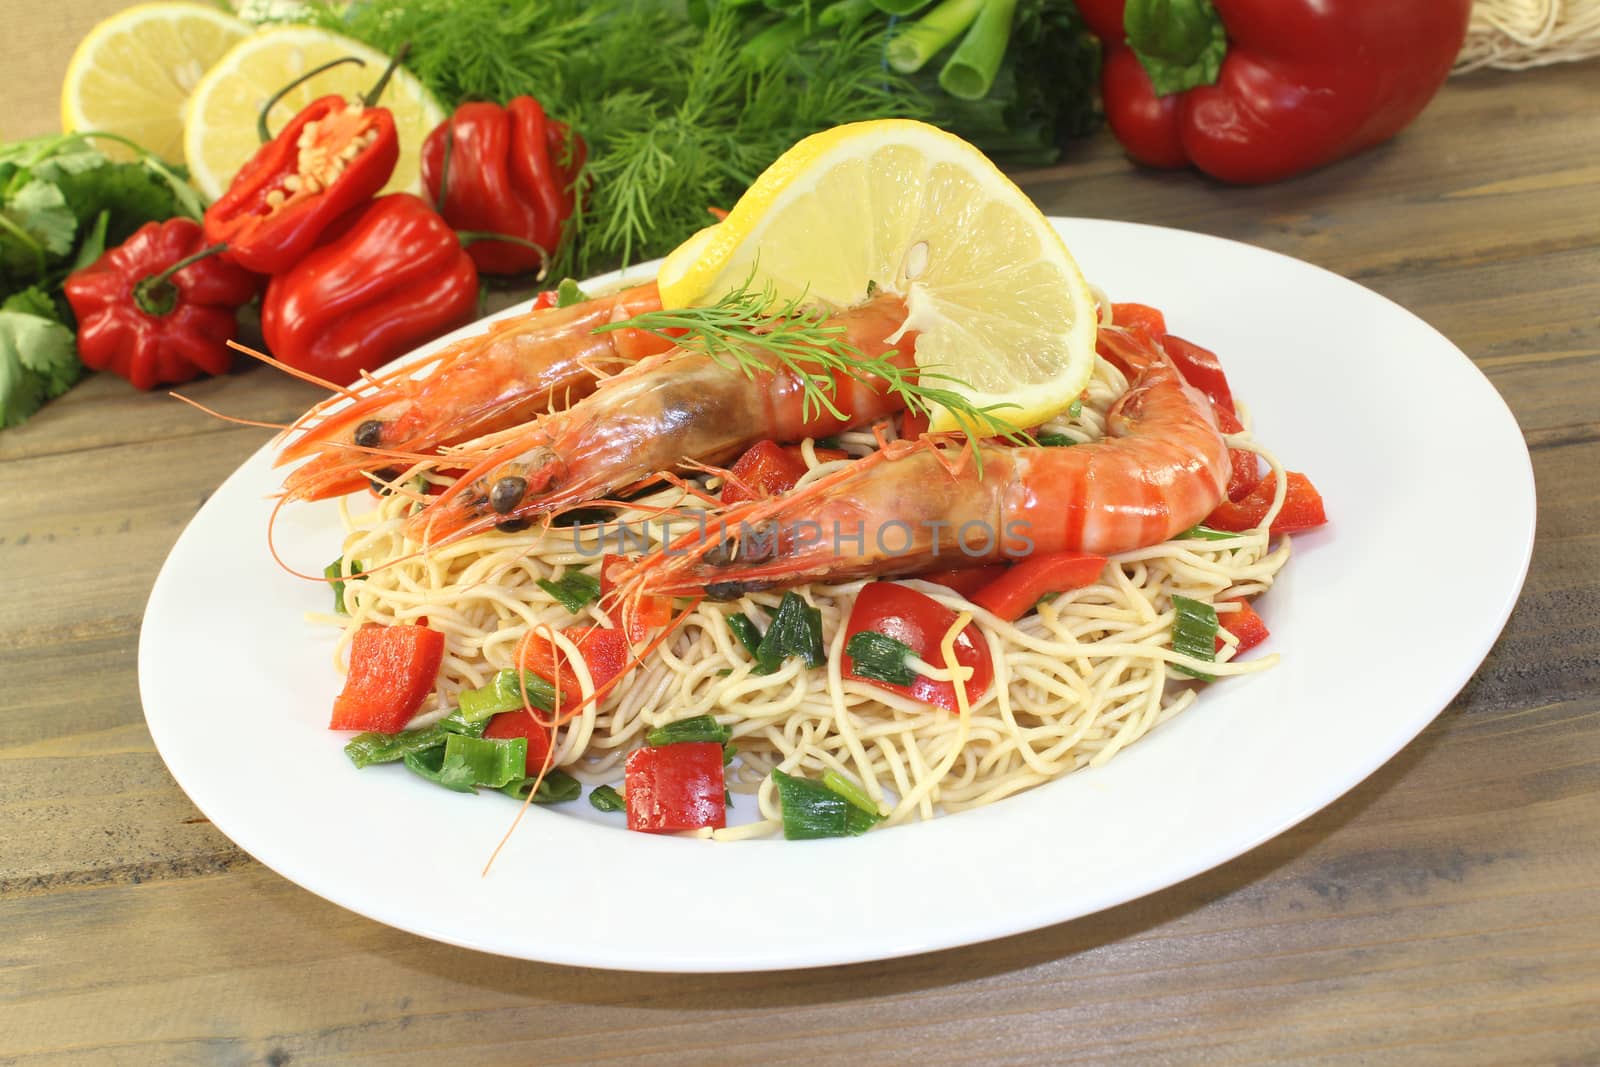 Prawns with Mie noodles with vegetables by discovery